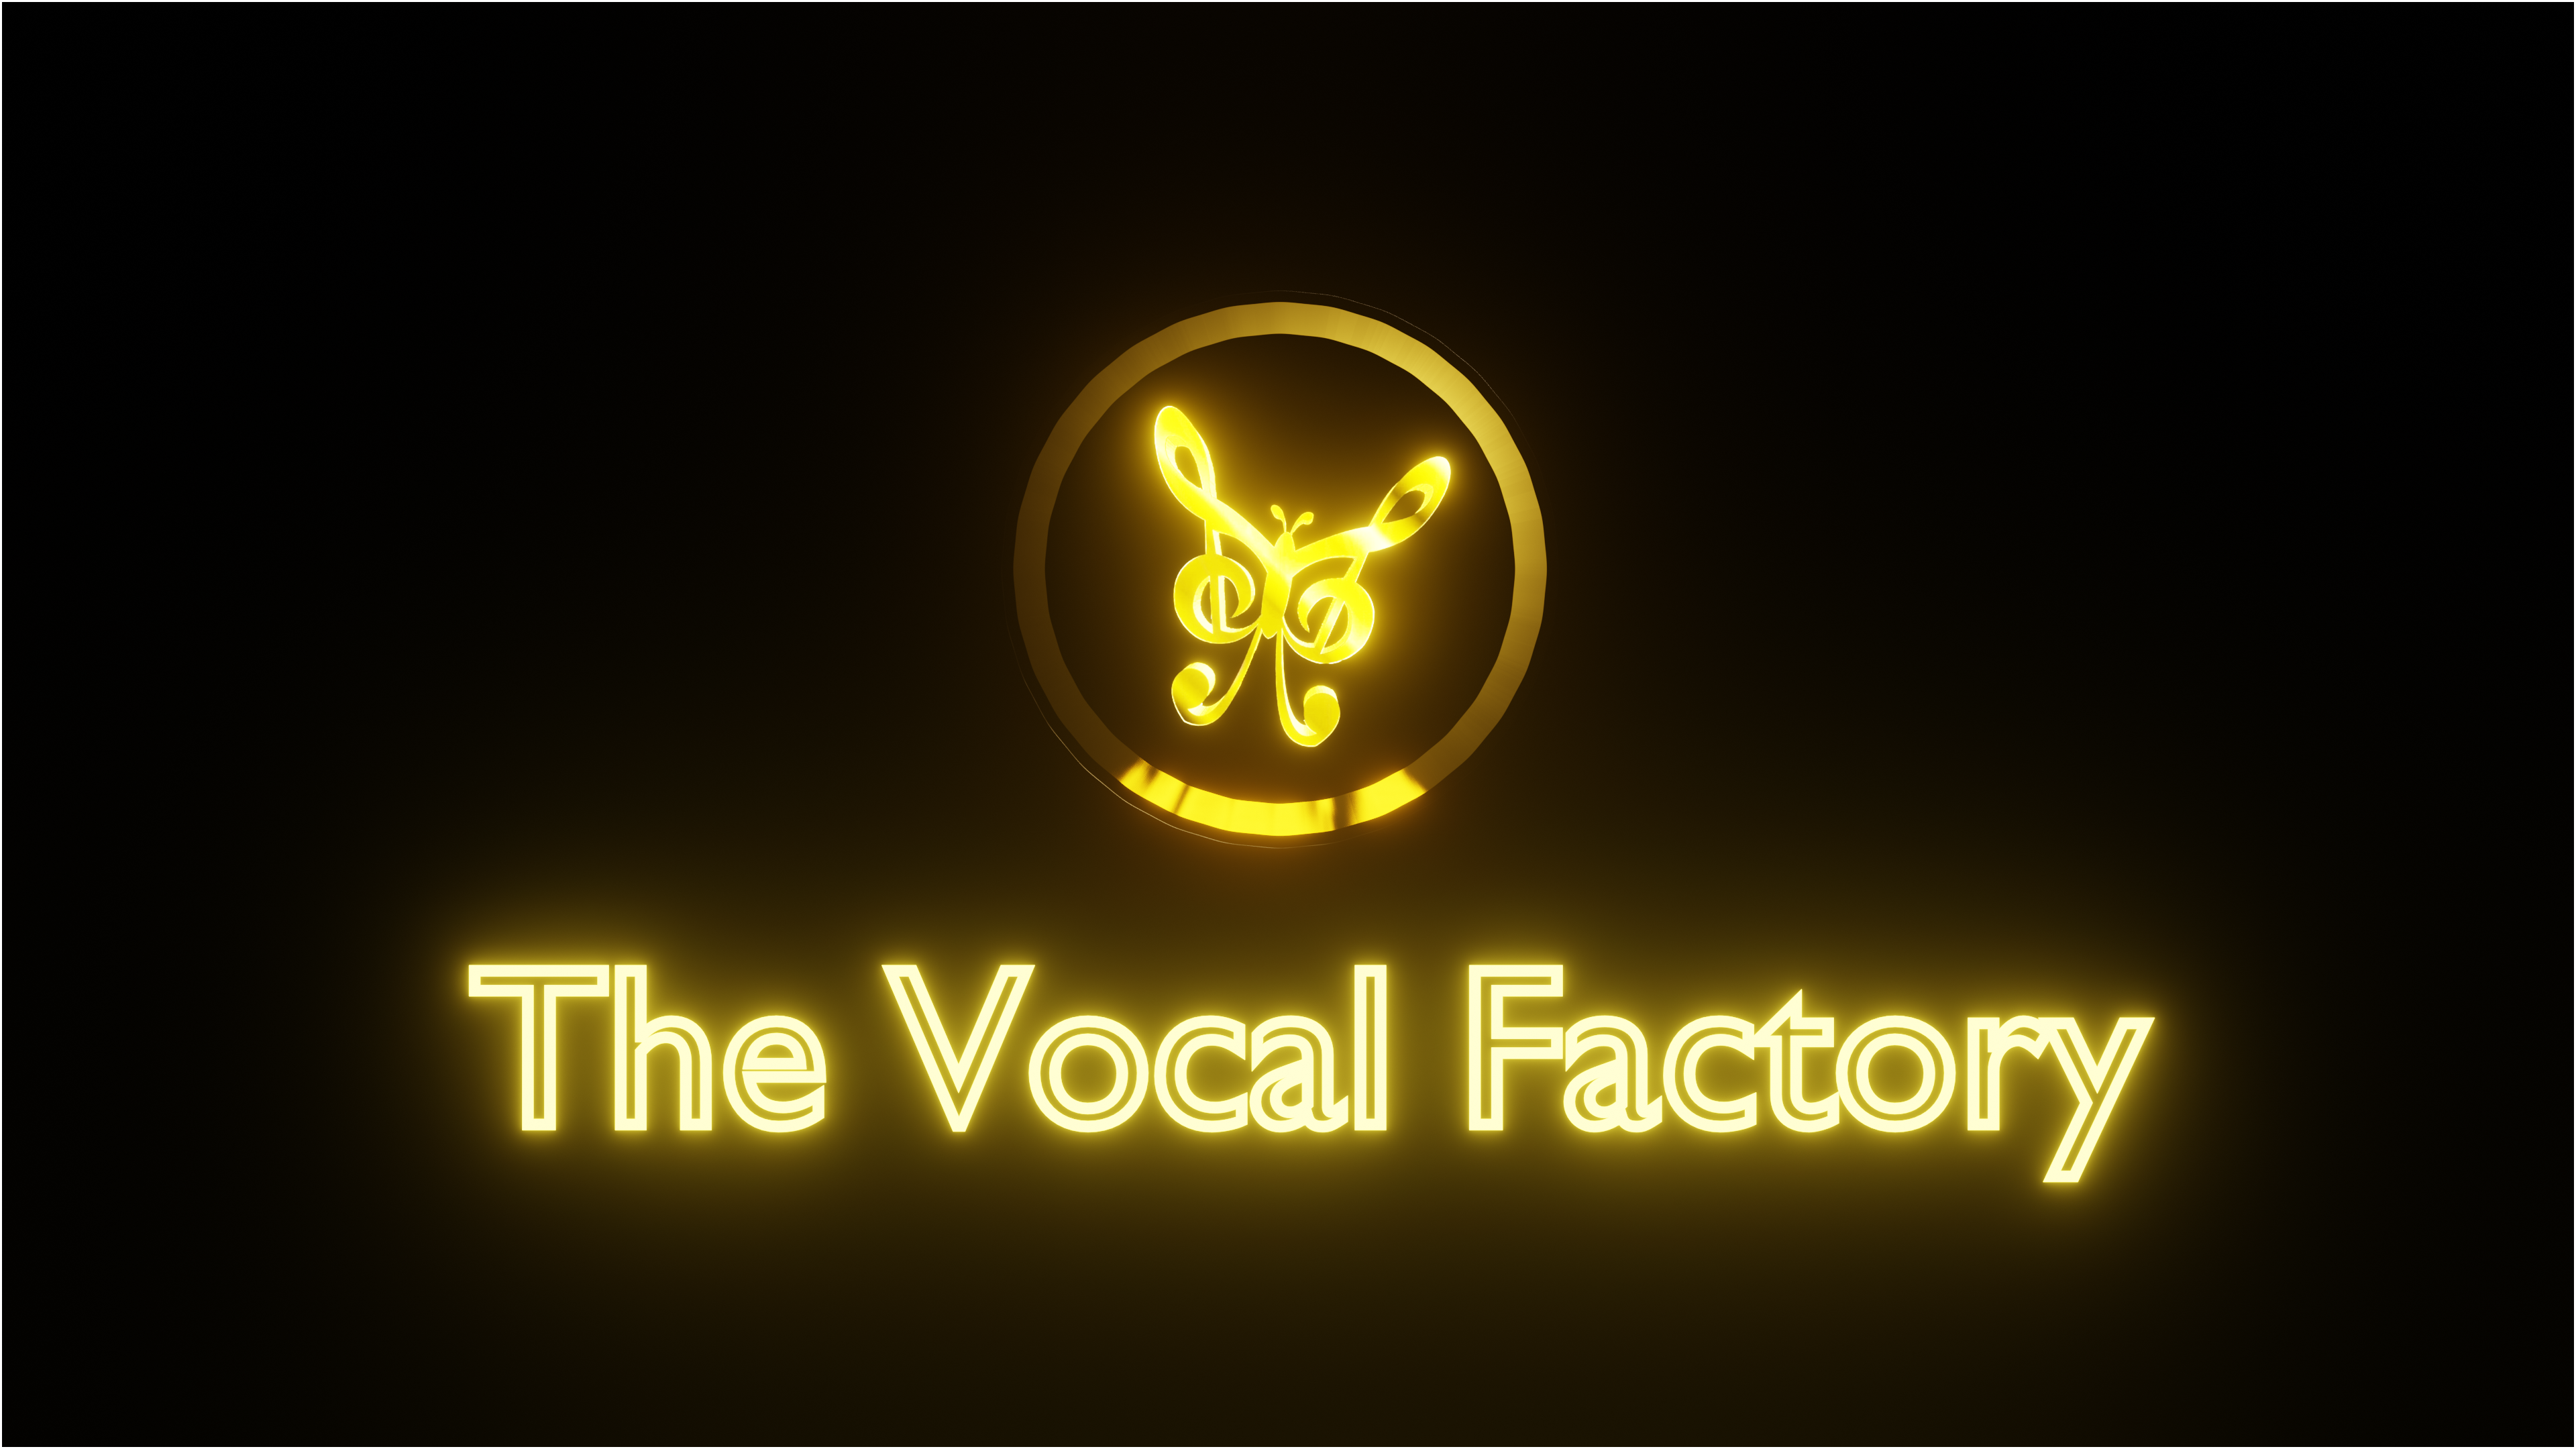 The Vocal Factory